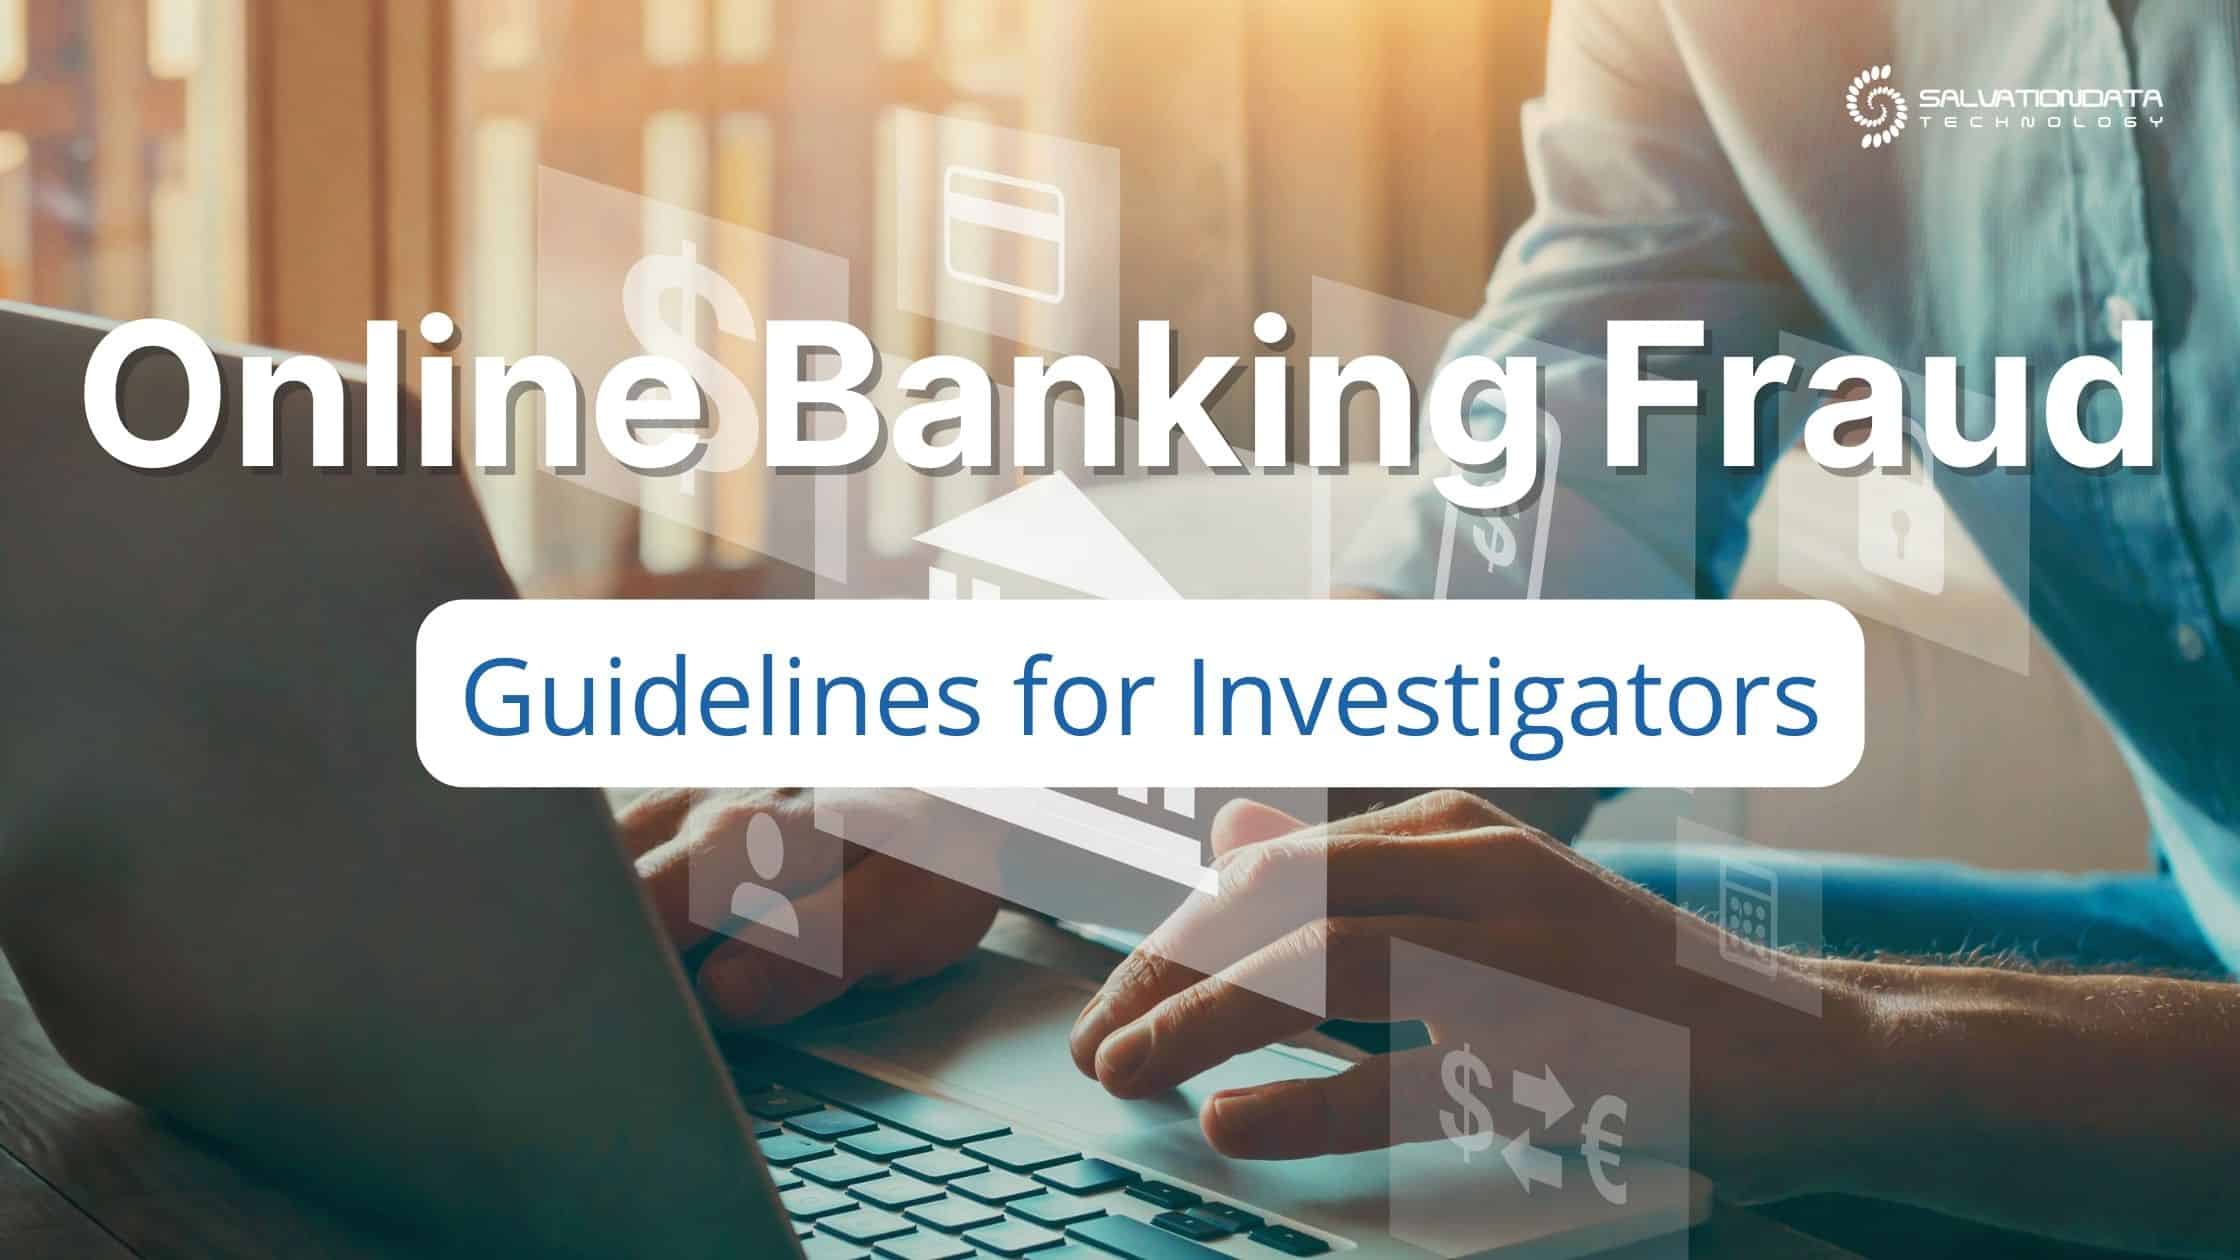 6 Types of Online Banking Fraud: Guidelines for Investigators